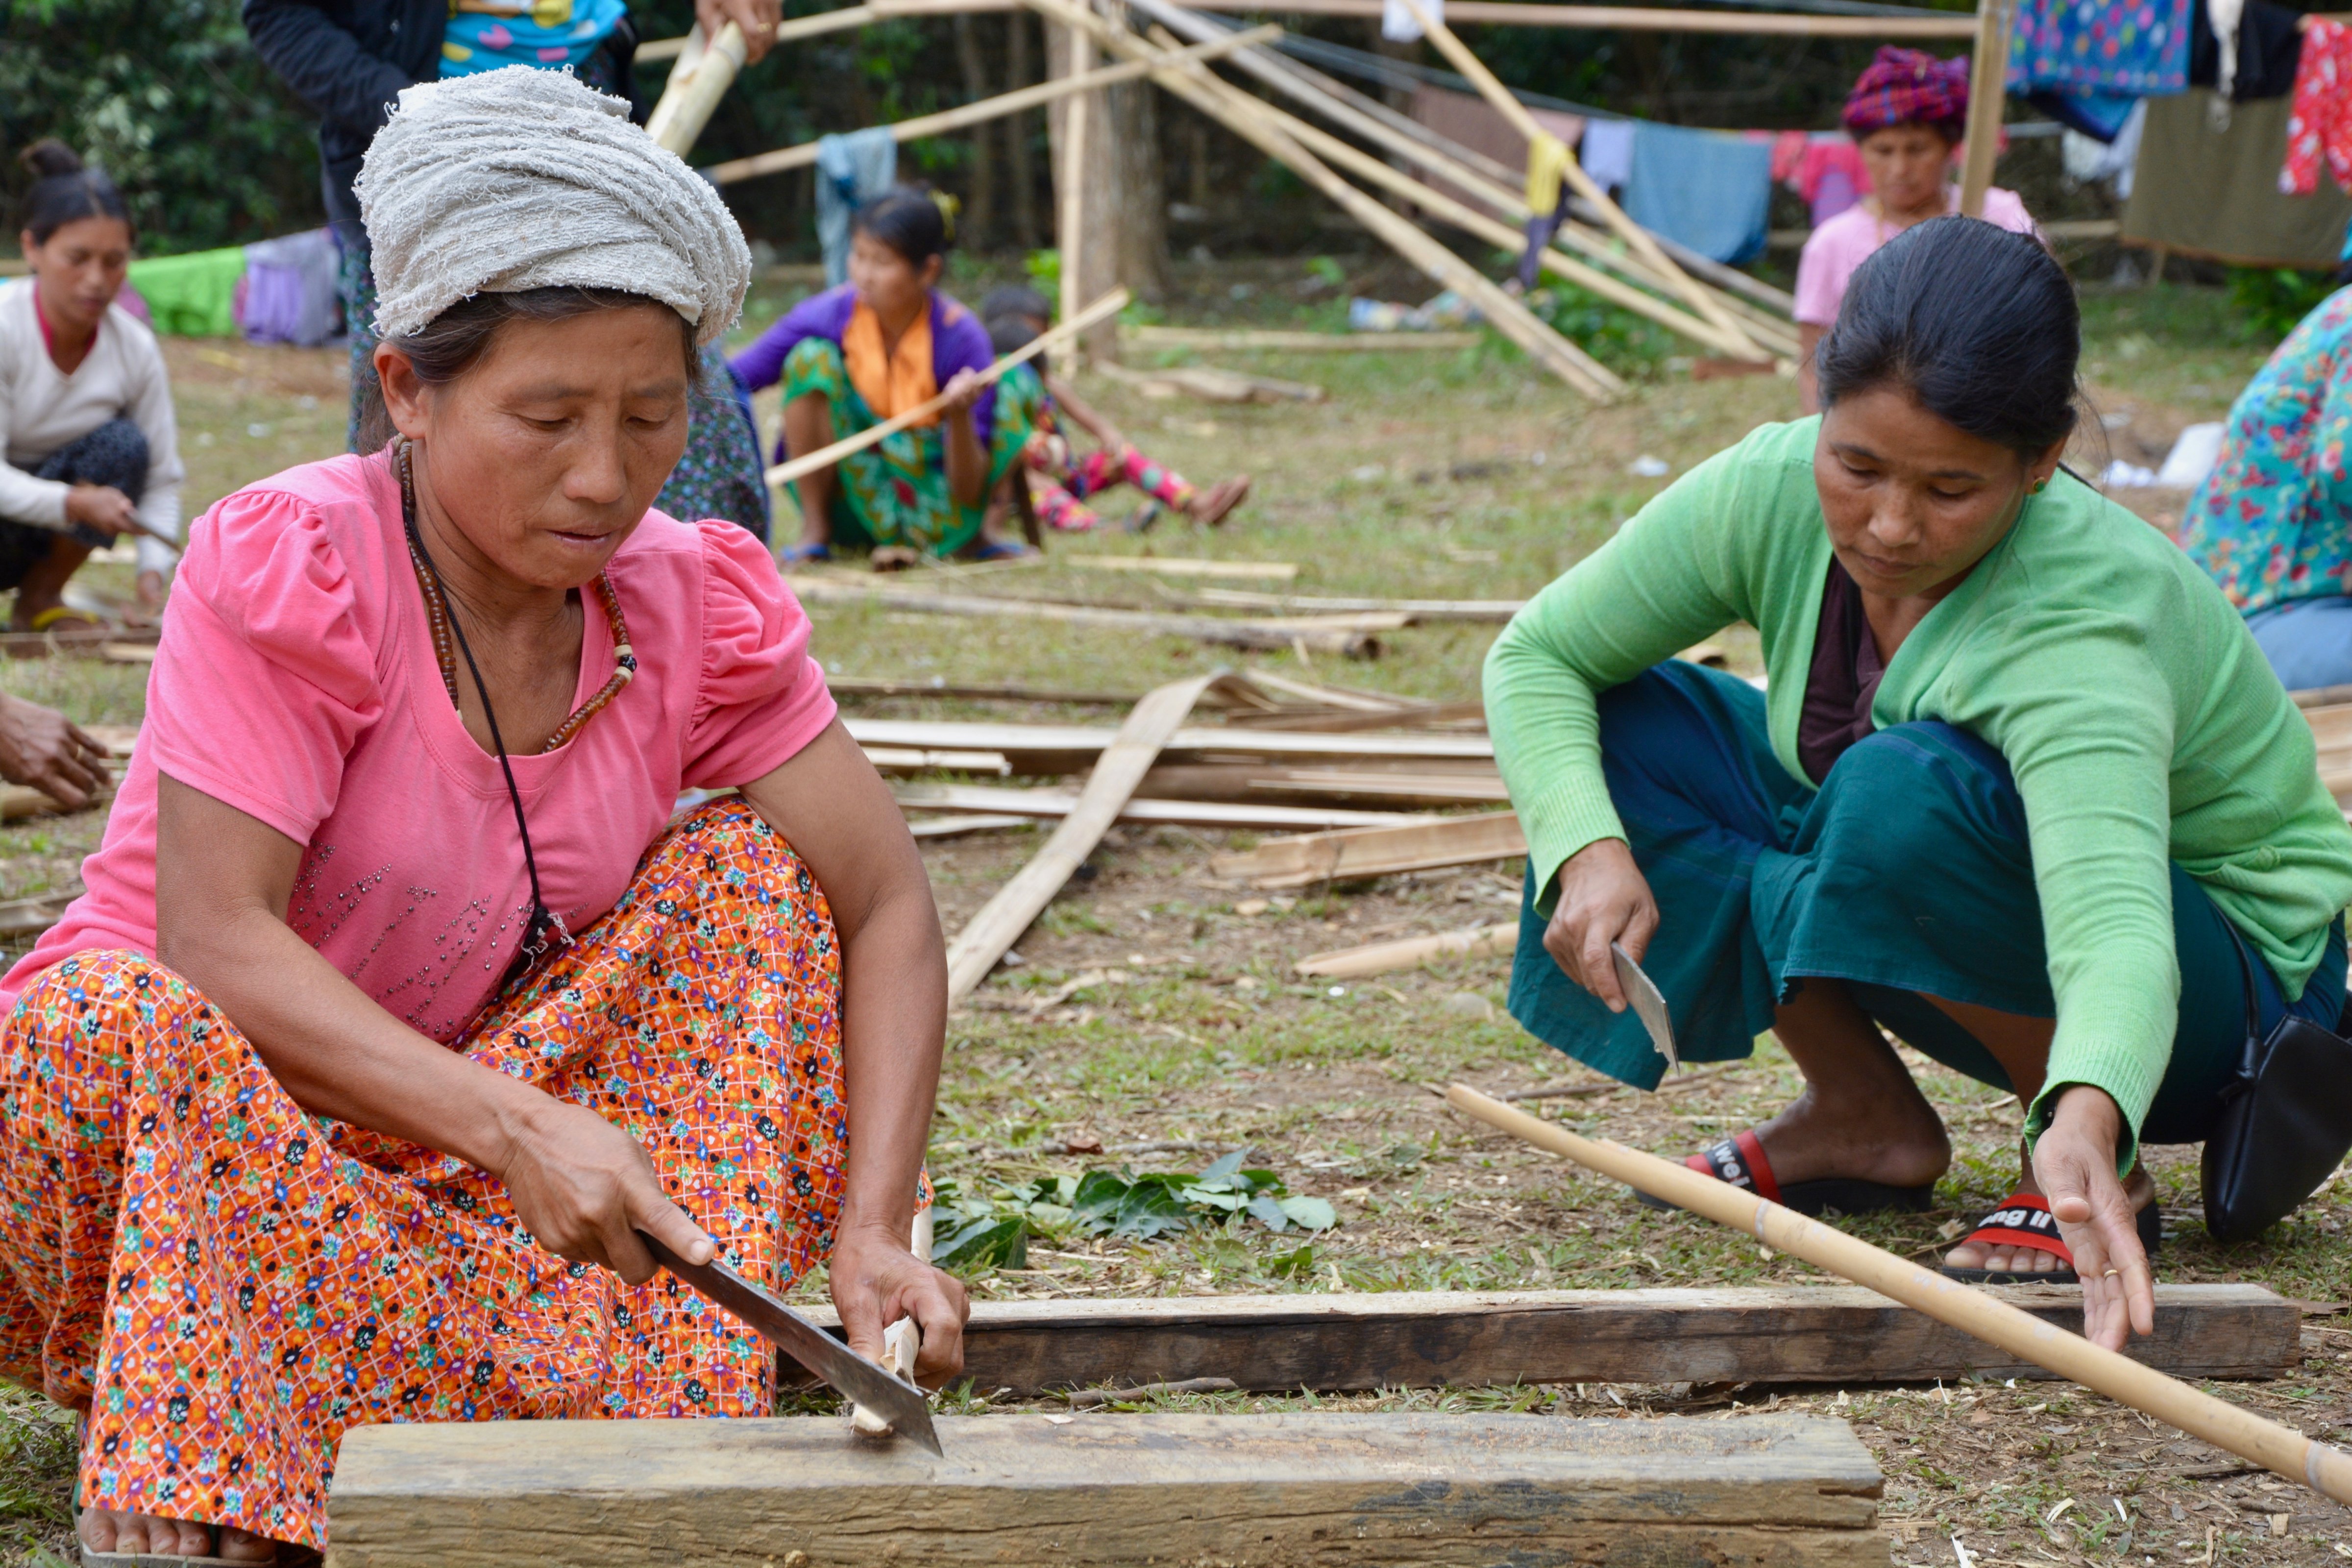 Kachin women build shelters in Kachin state, Myanmar. Fighting between Kachin rebels and the Myanmar army has displaced 5,000 people since early April. (Dustin Barter)